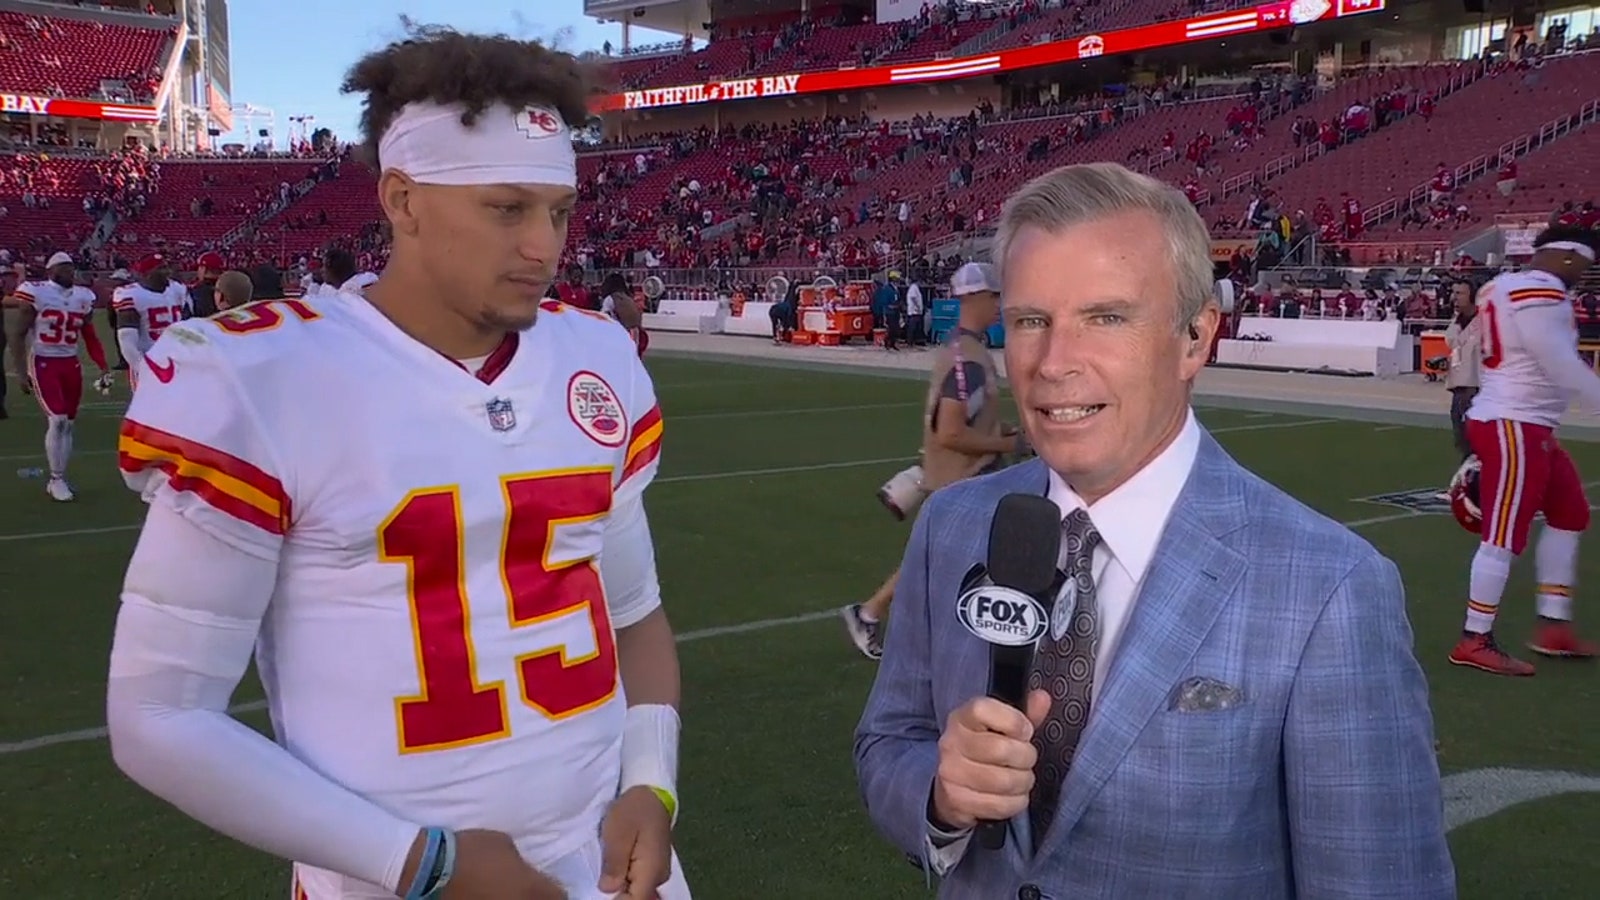 'We've got playmakers everywhere' - Patrick Mahomes